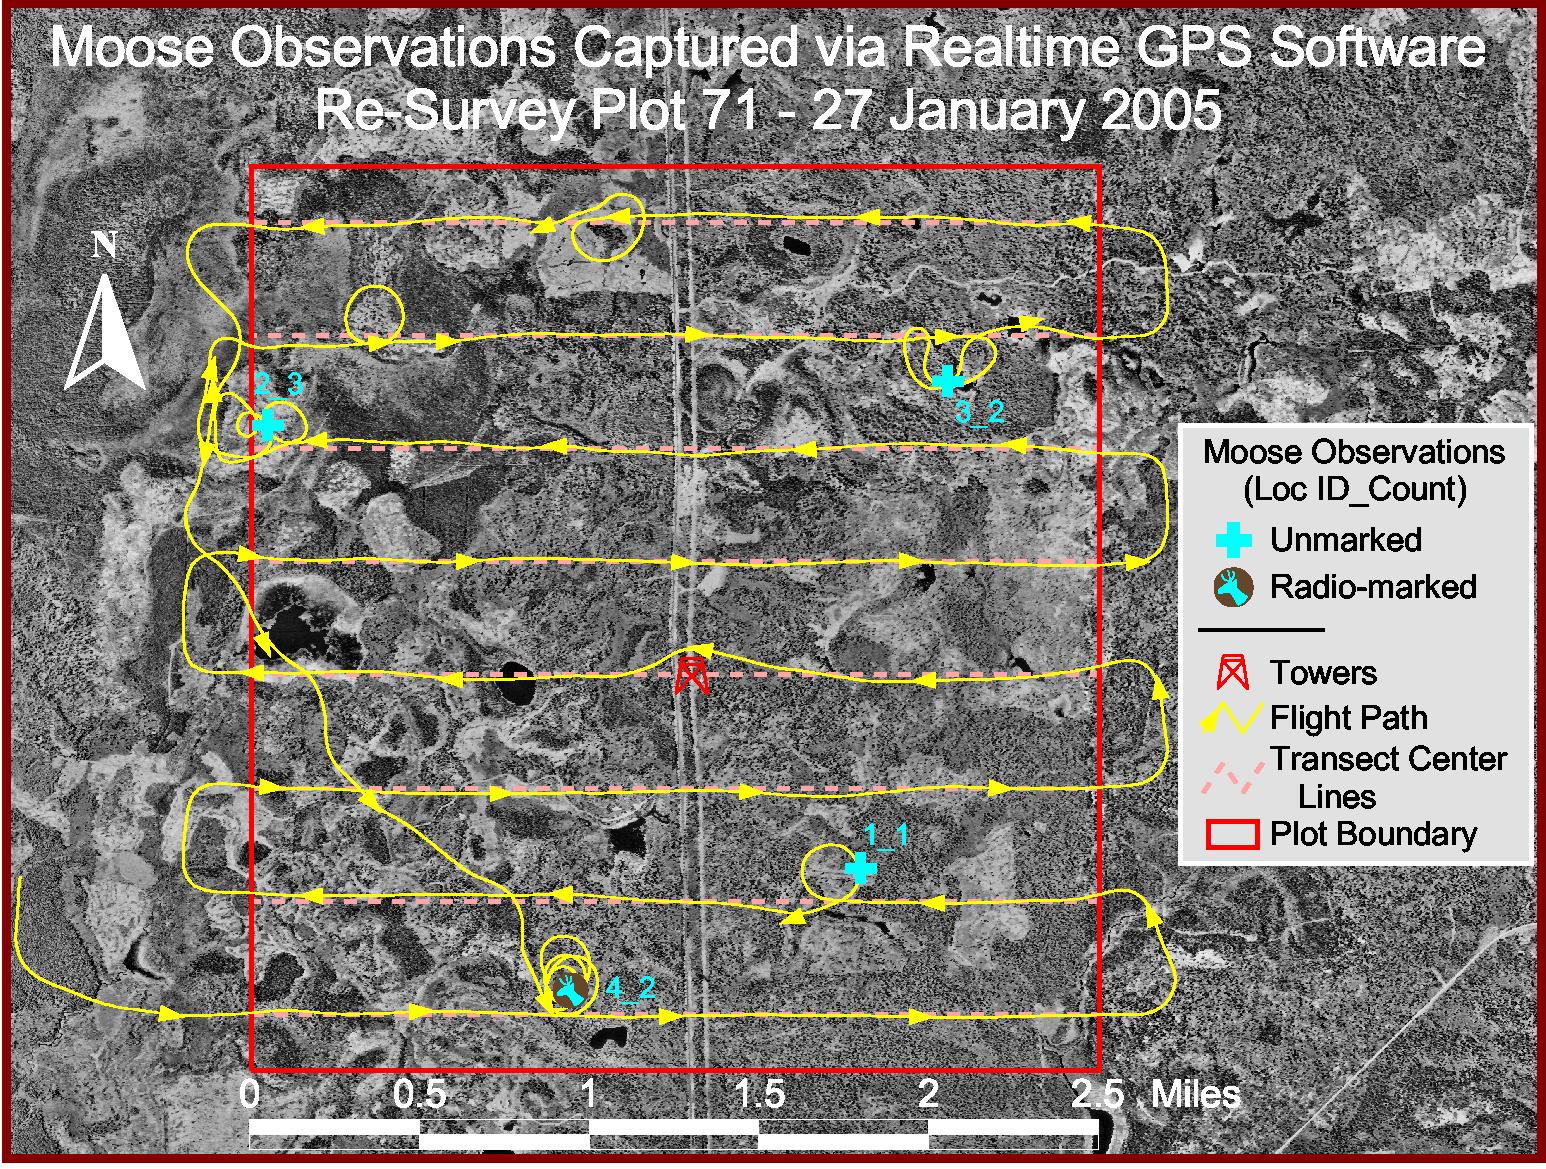 Survey flights used to estimate detection probabilities of radiocollared moose in Minnesota. Flight lines are in yellow. The moose in the lower left was not initially observed. At the end of the flight, this individual was located using the VHF signal on the collar and found to be within the flown plot. Figure created by Robert Wright, Minnesota Department of Natural Resources.